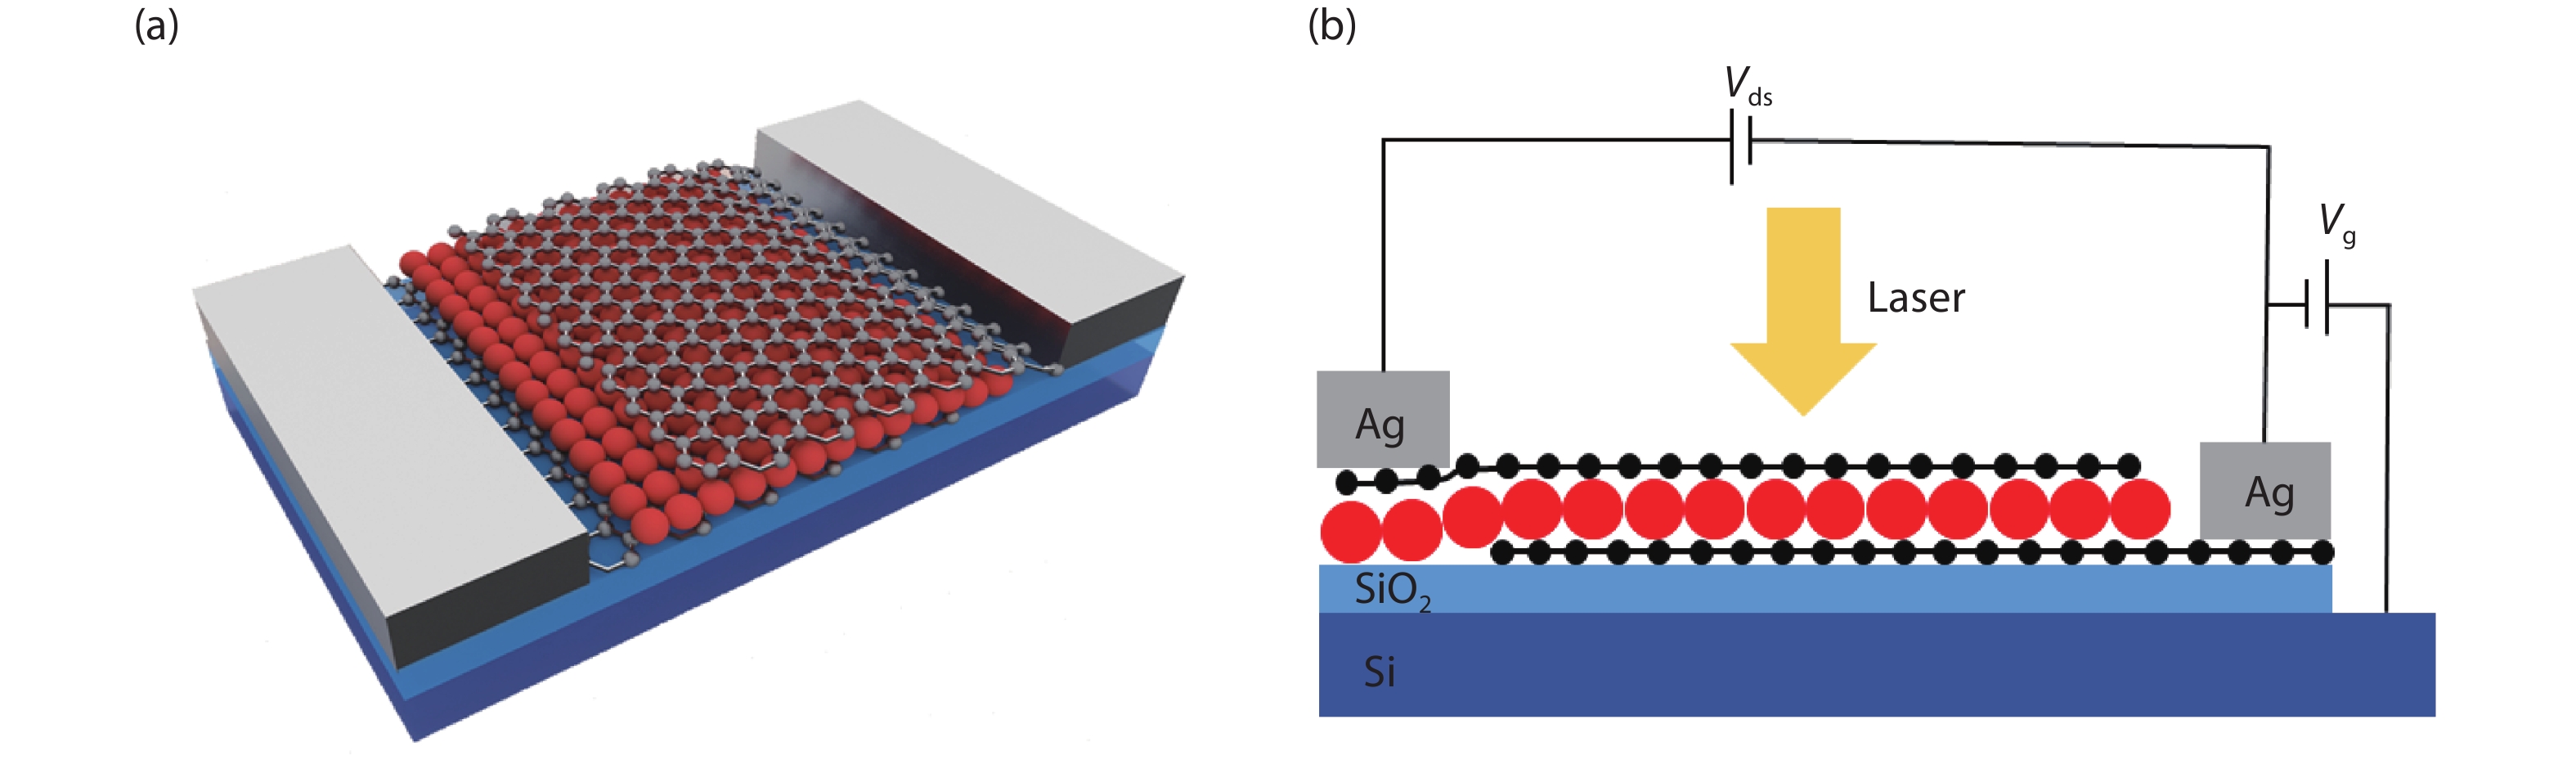 (Color online) Device schematic. (a) Device with three-layer structure of graphene/CdSe QDs/graphene, silver as the electrodes on each graphene. (b) Circuit connection diagram of the devices.